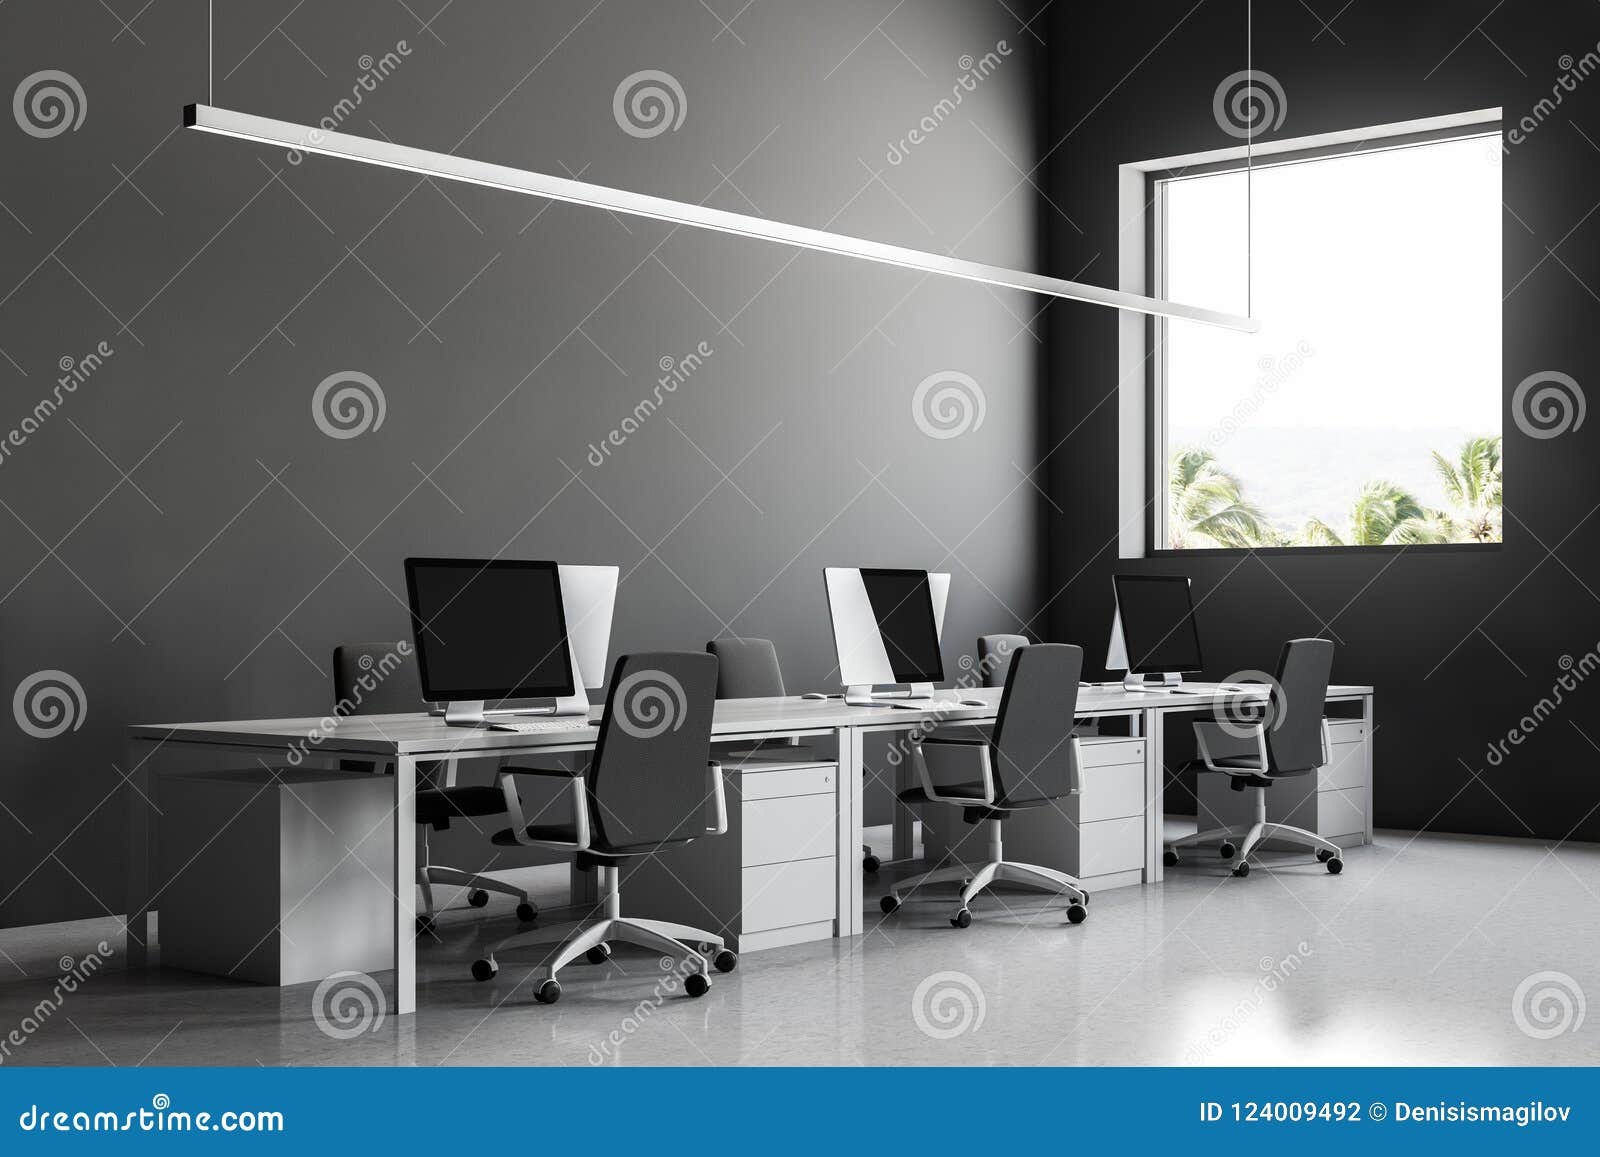 Row Of Computer Desks In Gray Office Side View Stock Illustration